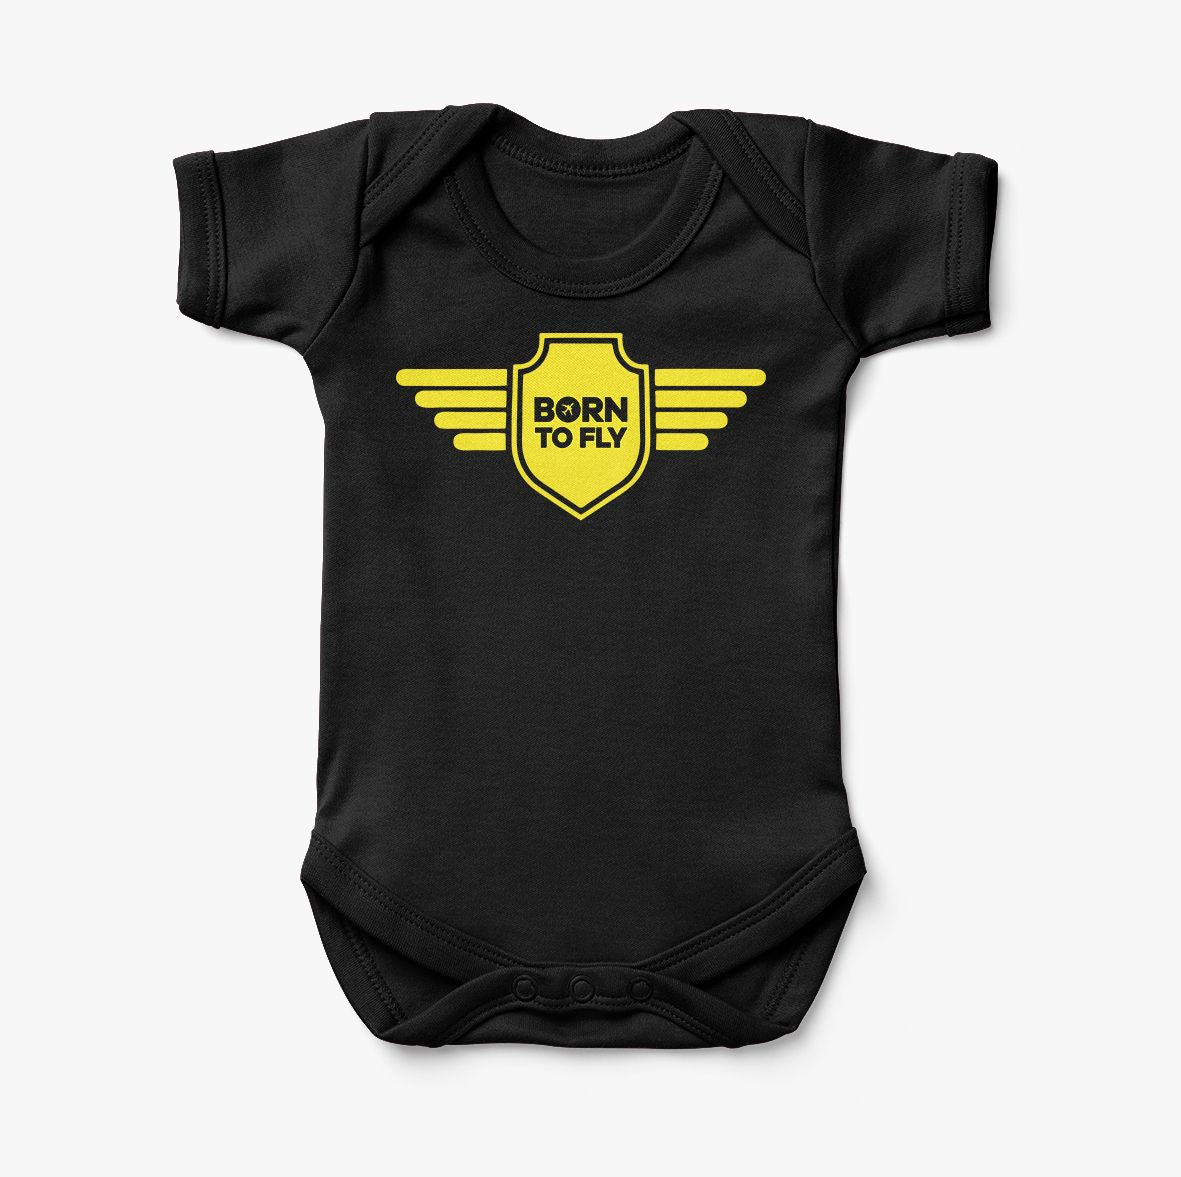 Born To Fly & Badge Designed Baby Bodysuits